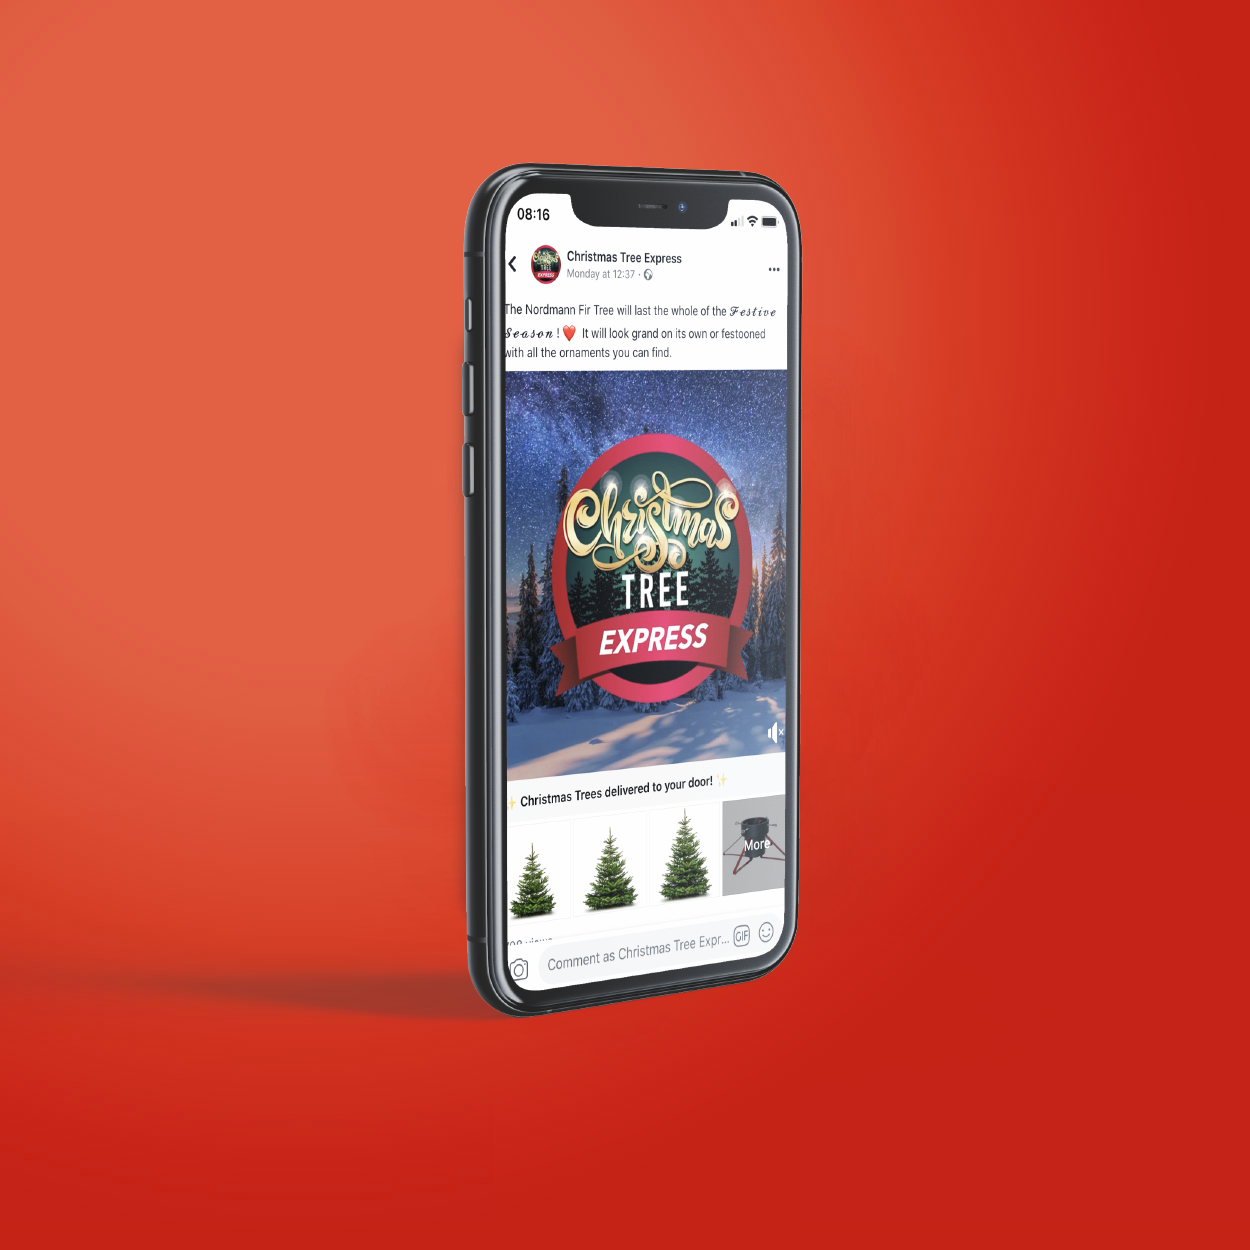 D35IGN Christmas tree express Facebook adverting